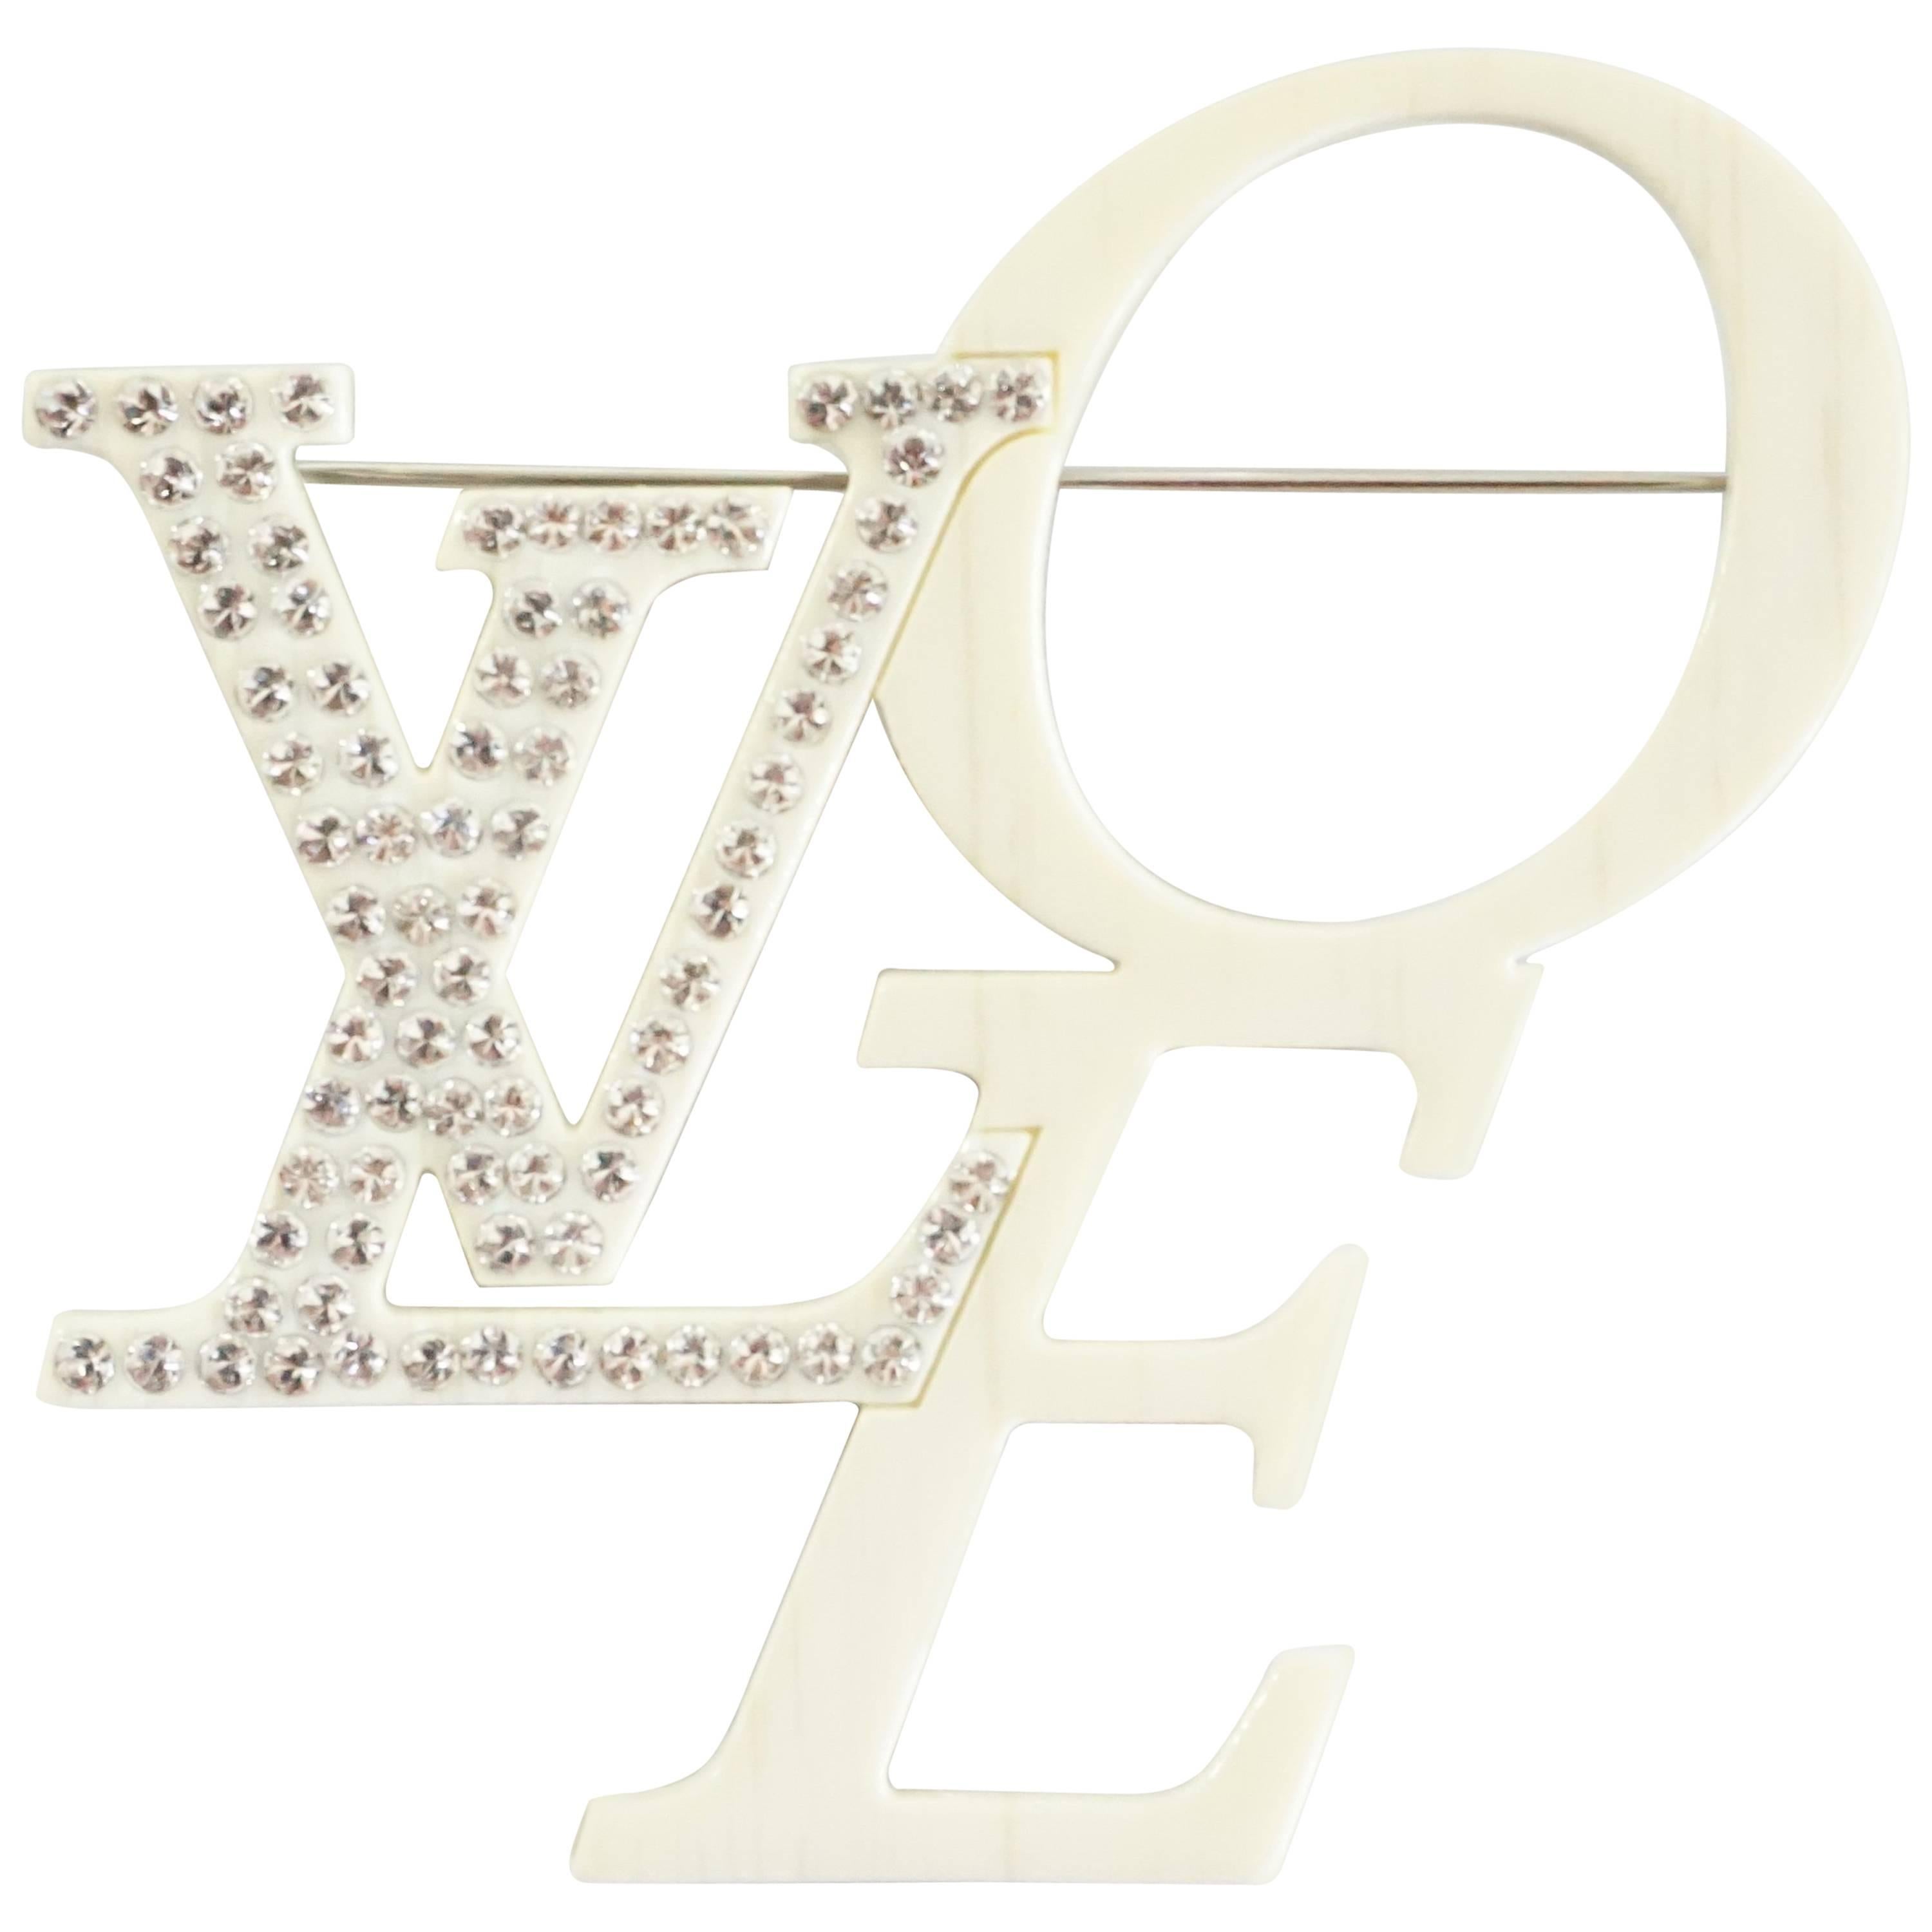 Marc Jacobs for Louis Vuitton Ivory Rhinestone Love Brooch 